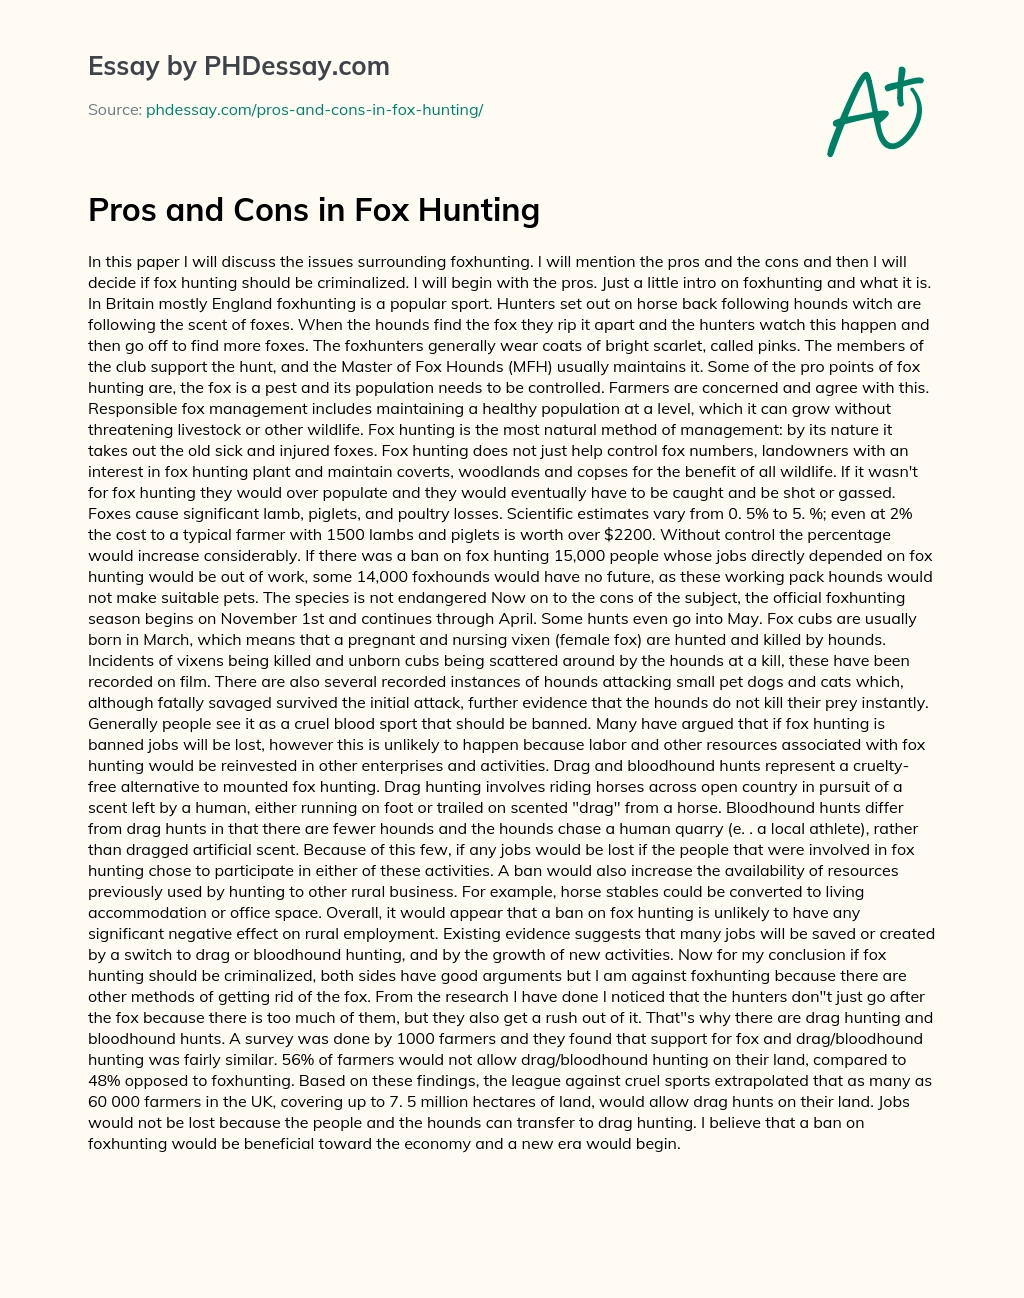 Pros and Cons in Fox Hunting essay